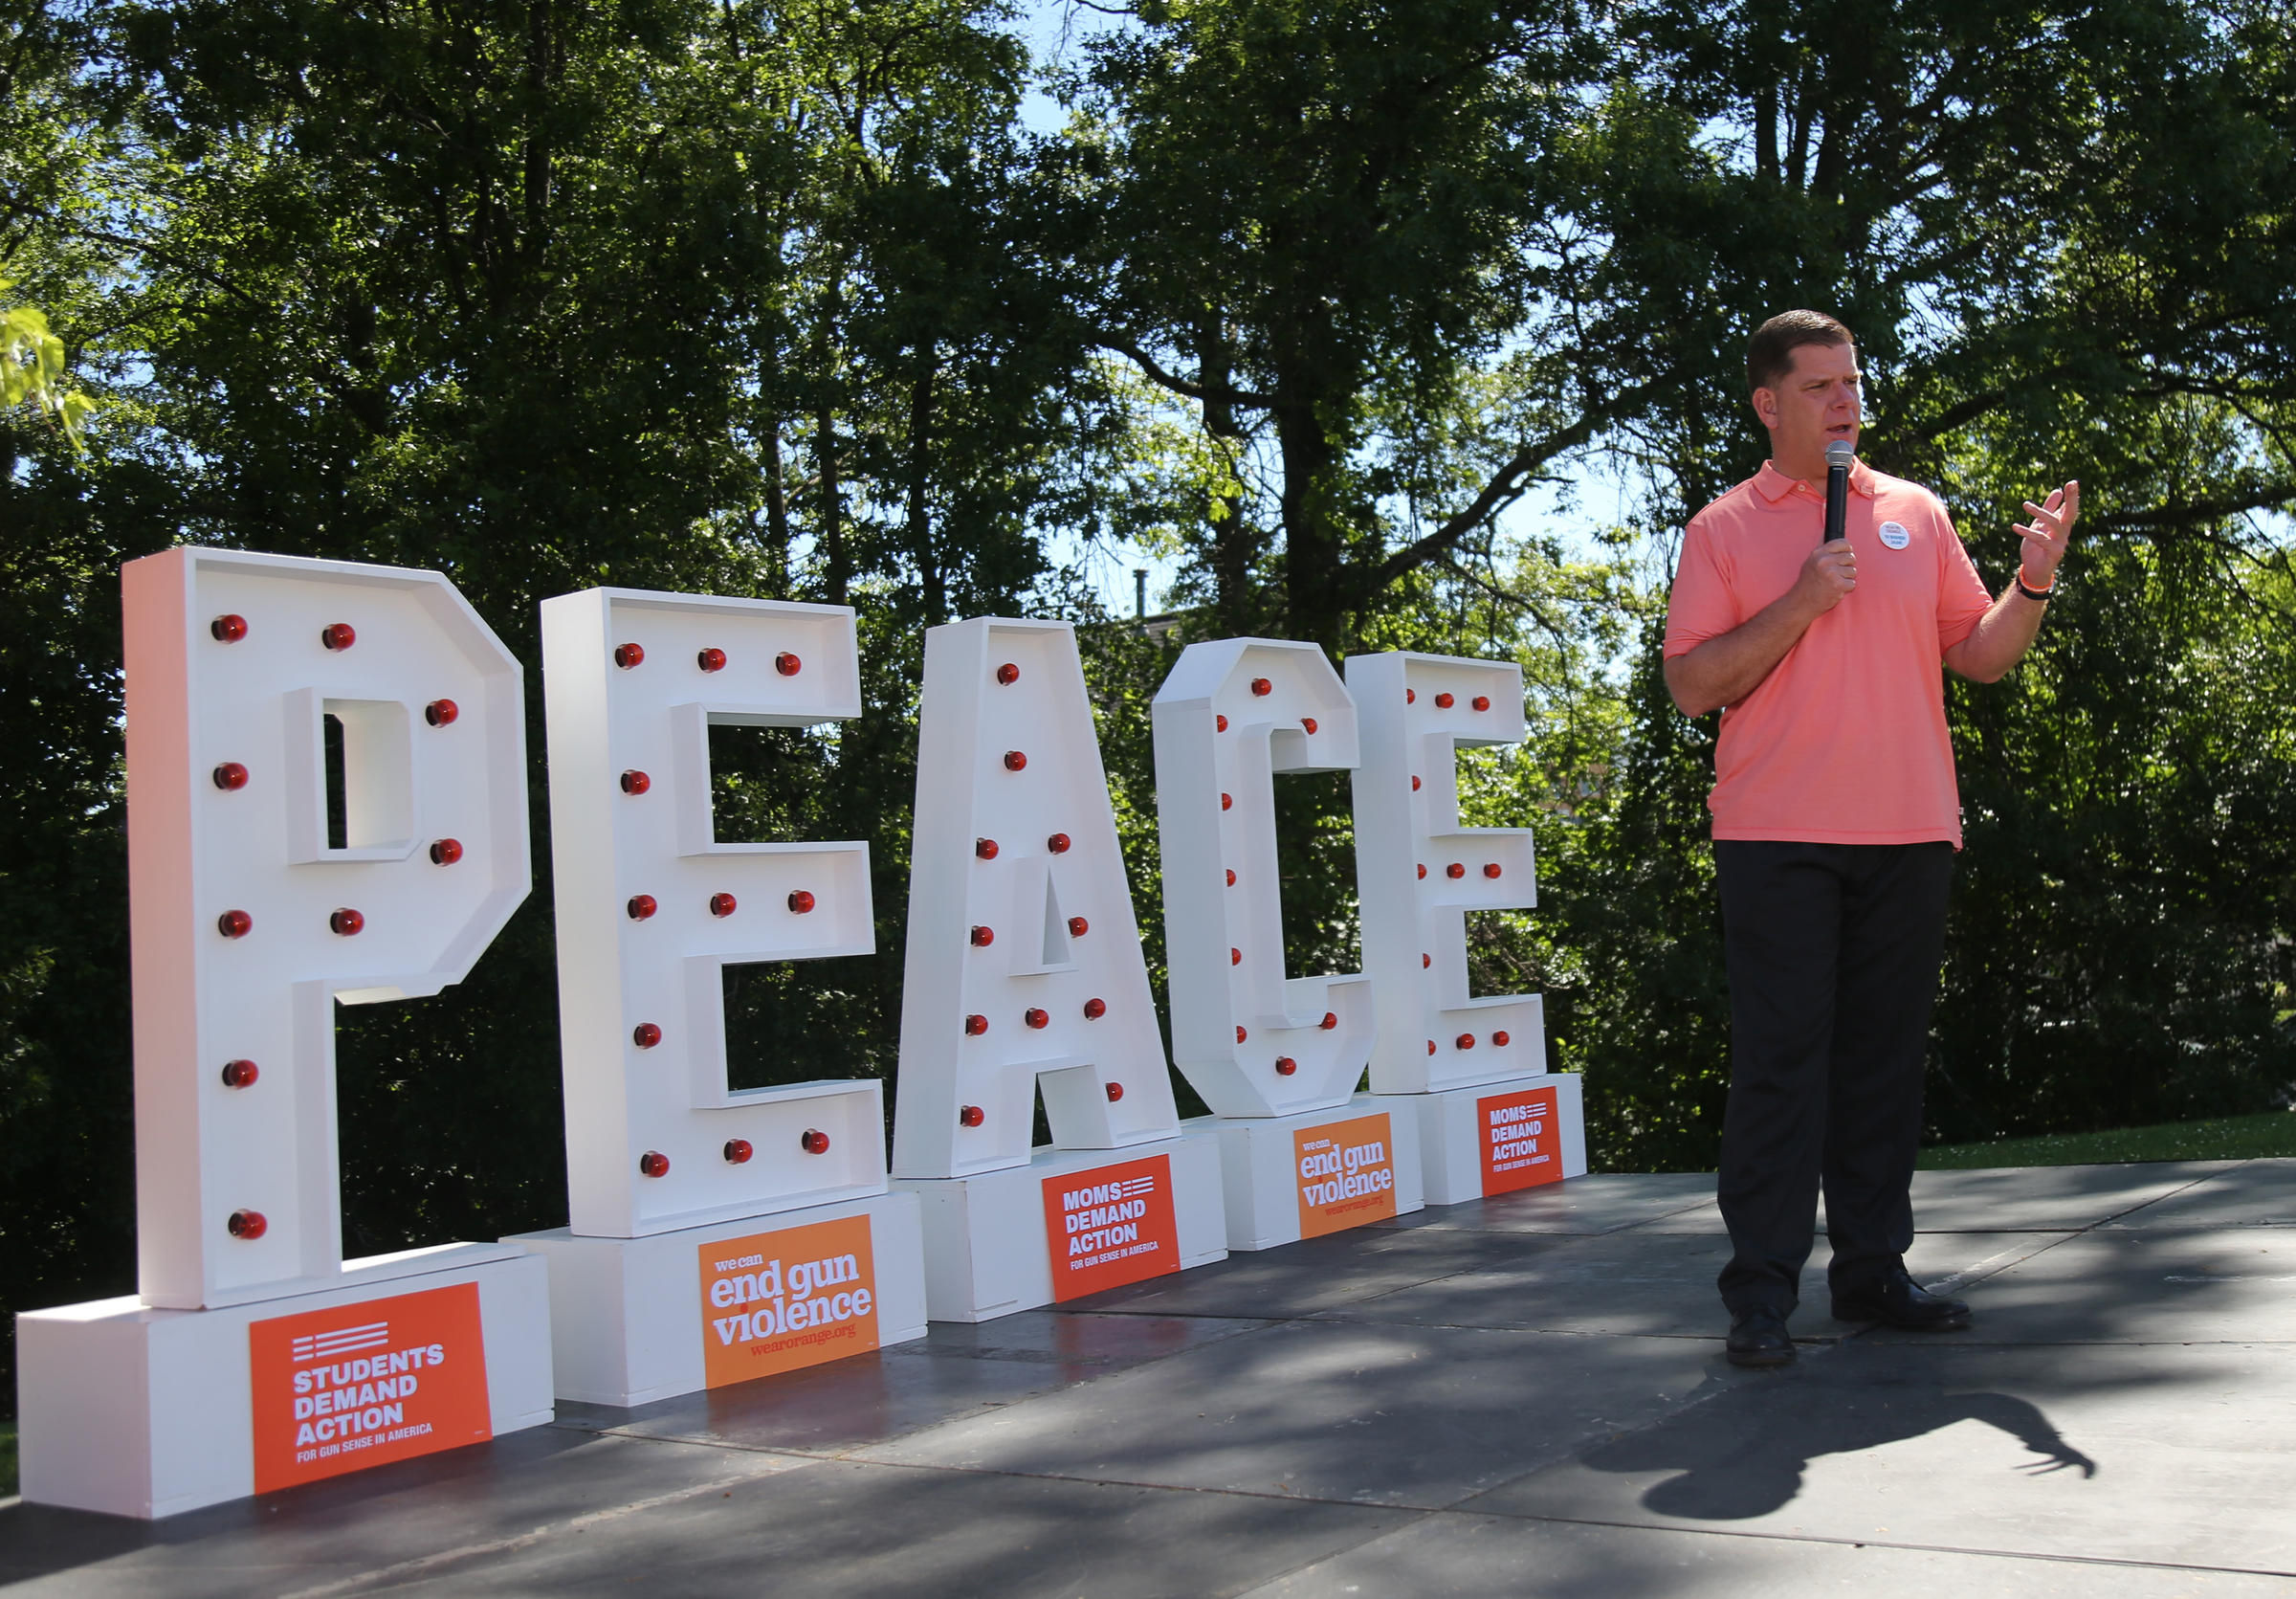 Mayor Walsh speaking at even in front of Peace sign